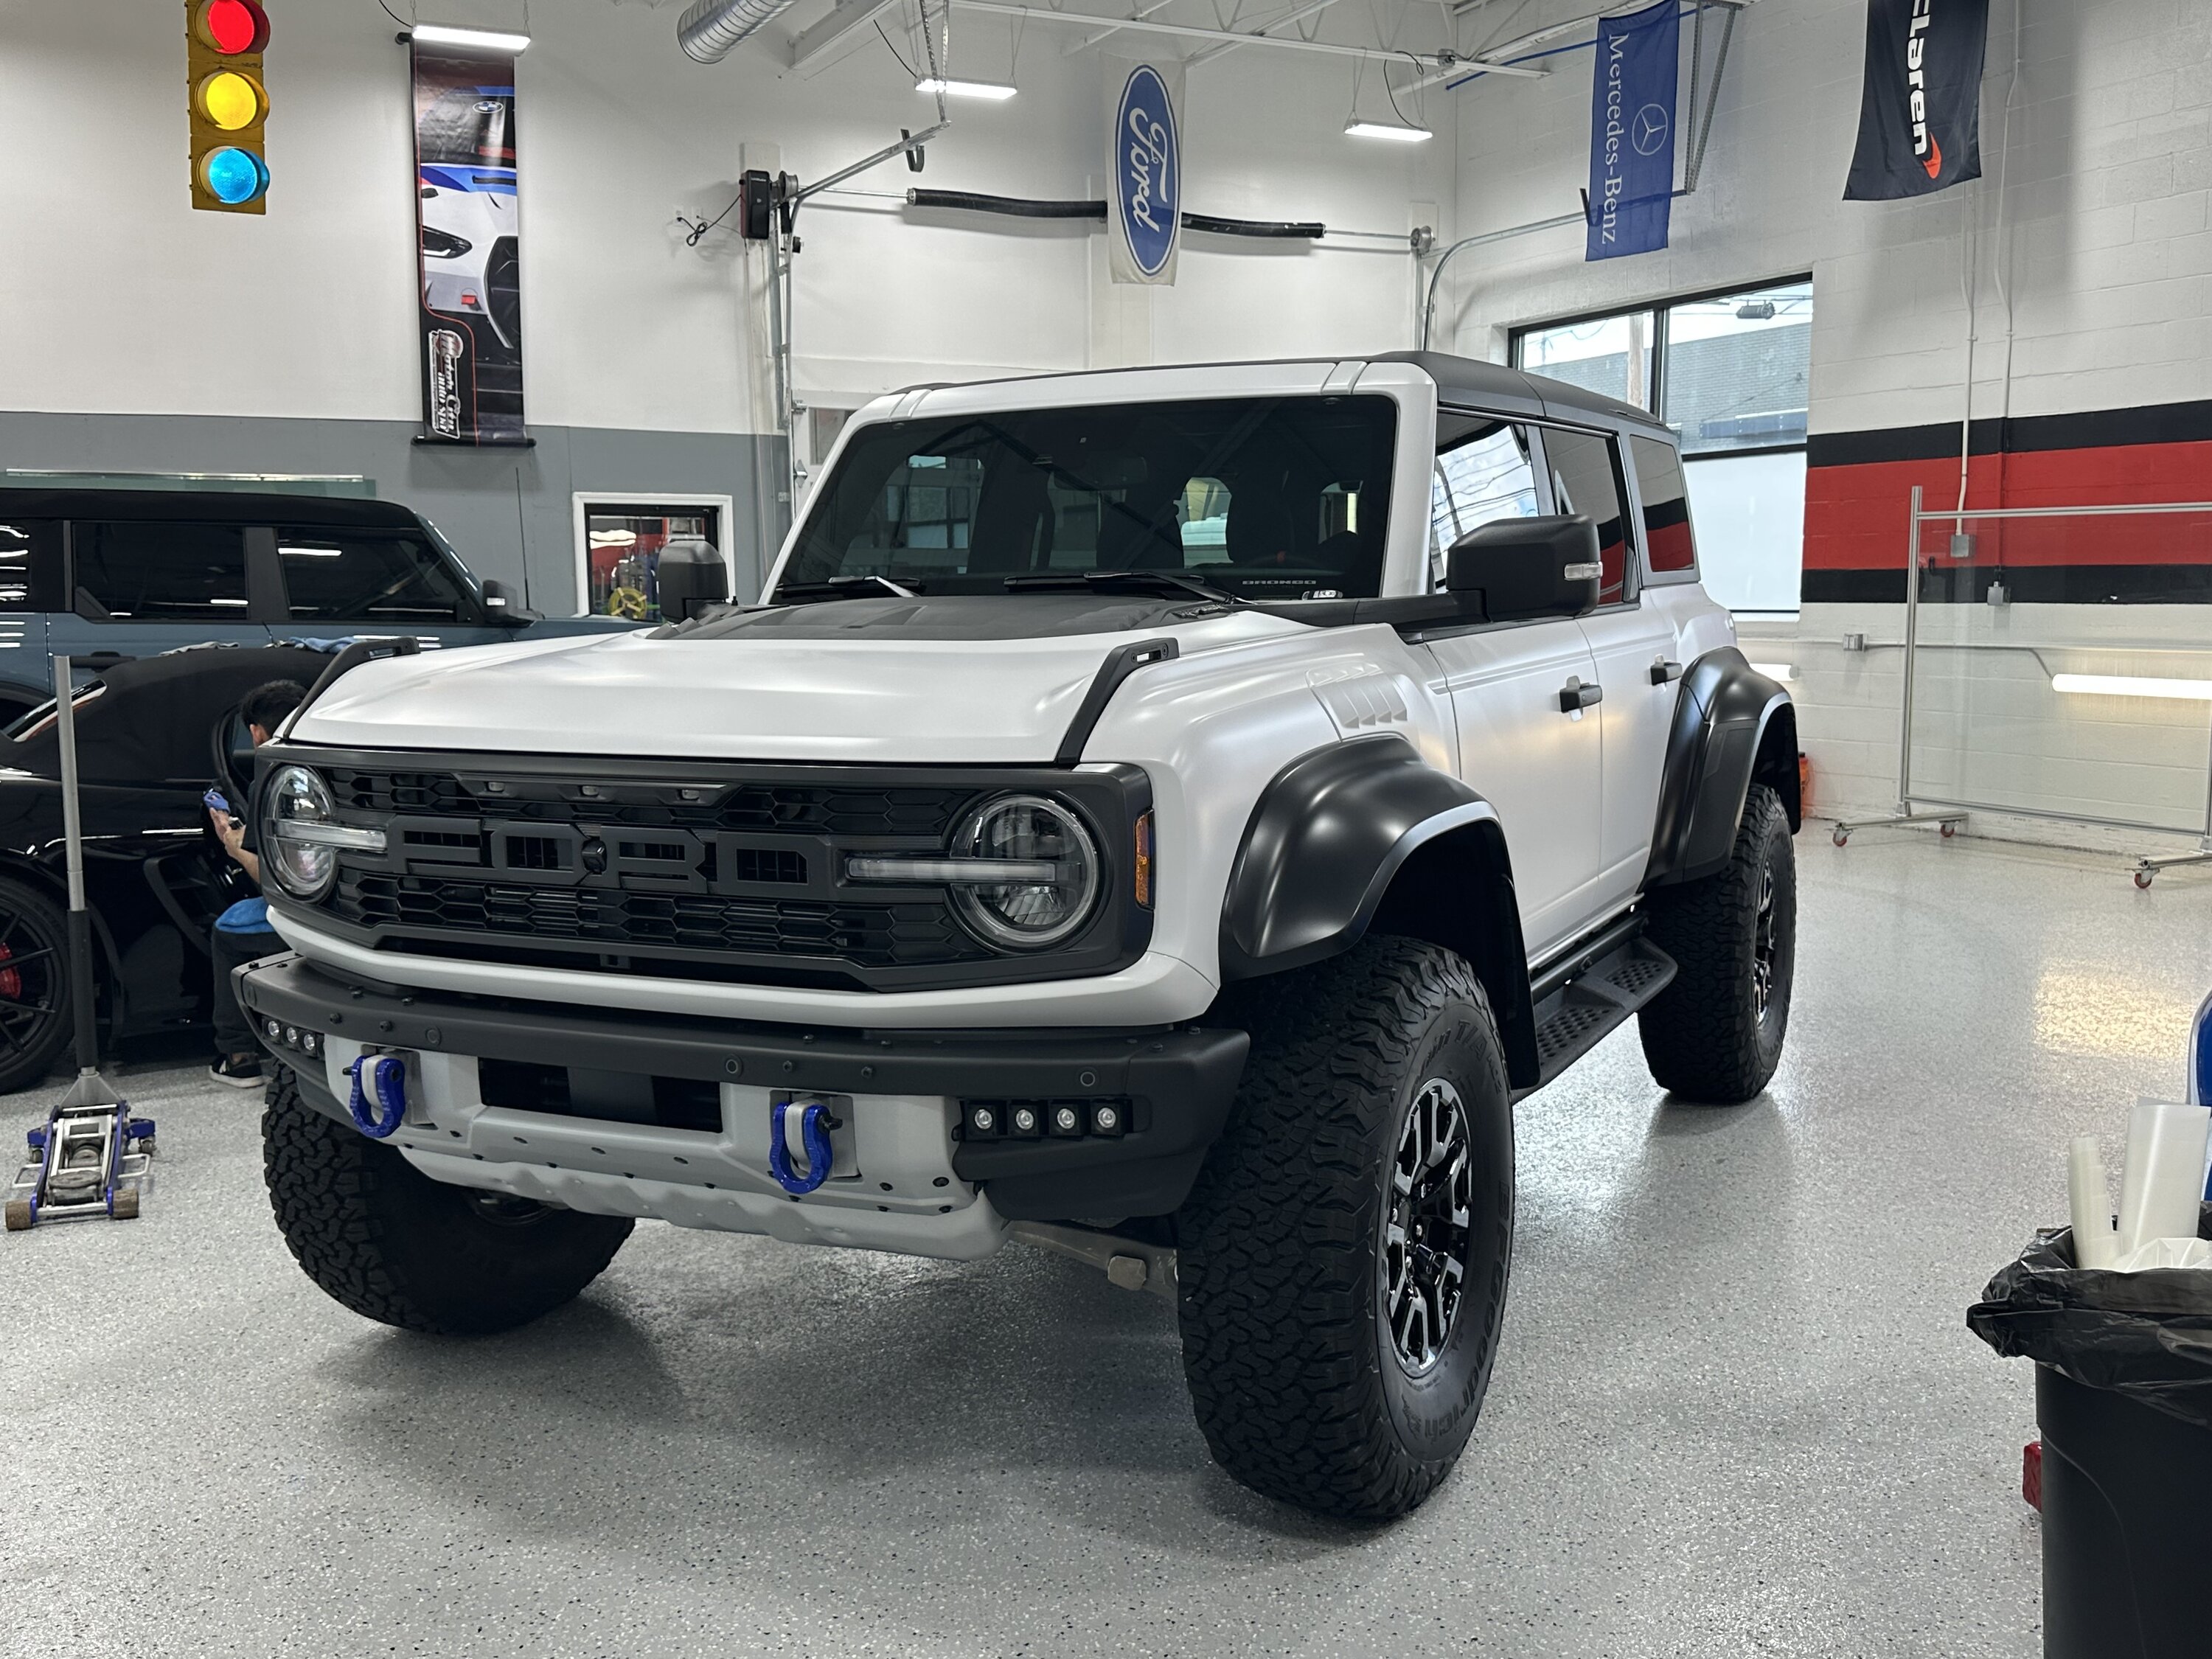 Ford Bronco XPEL Stealth PPF Wrap Completed on Bronco Raptor in Oxford White IMG_1171